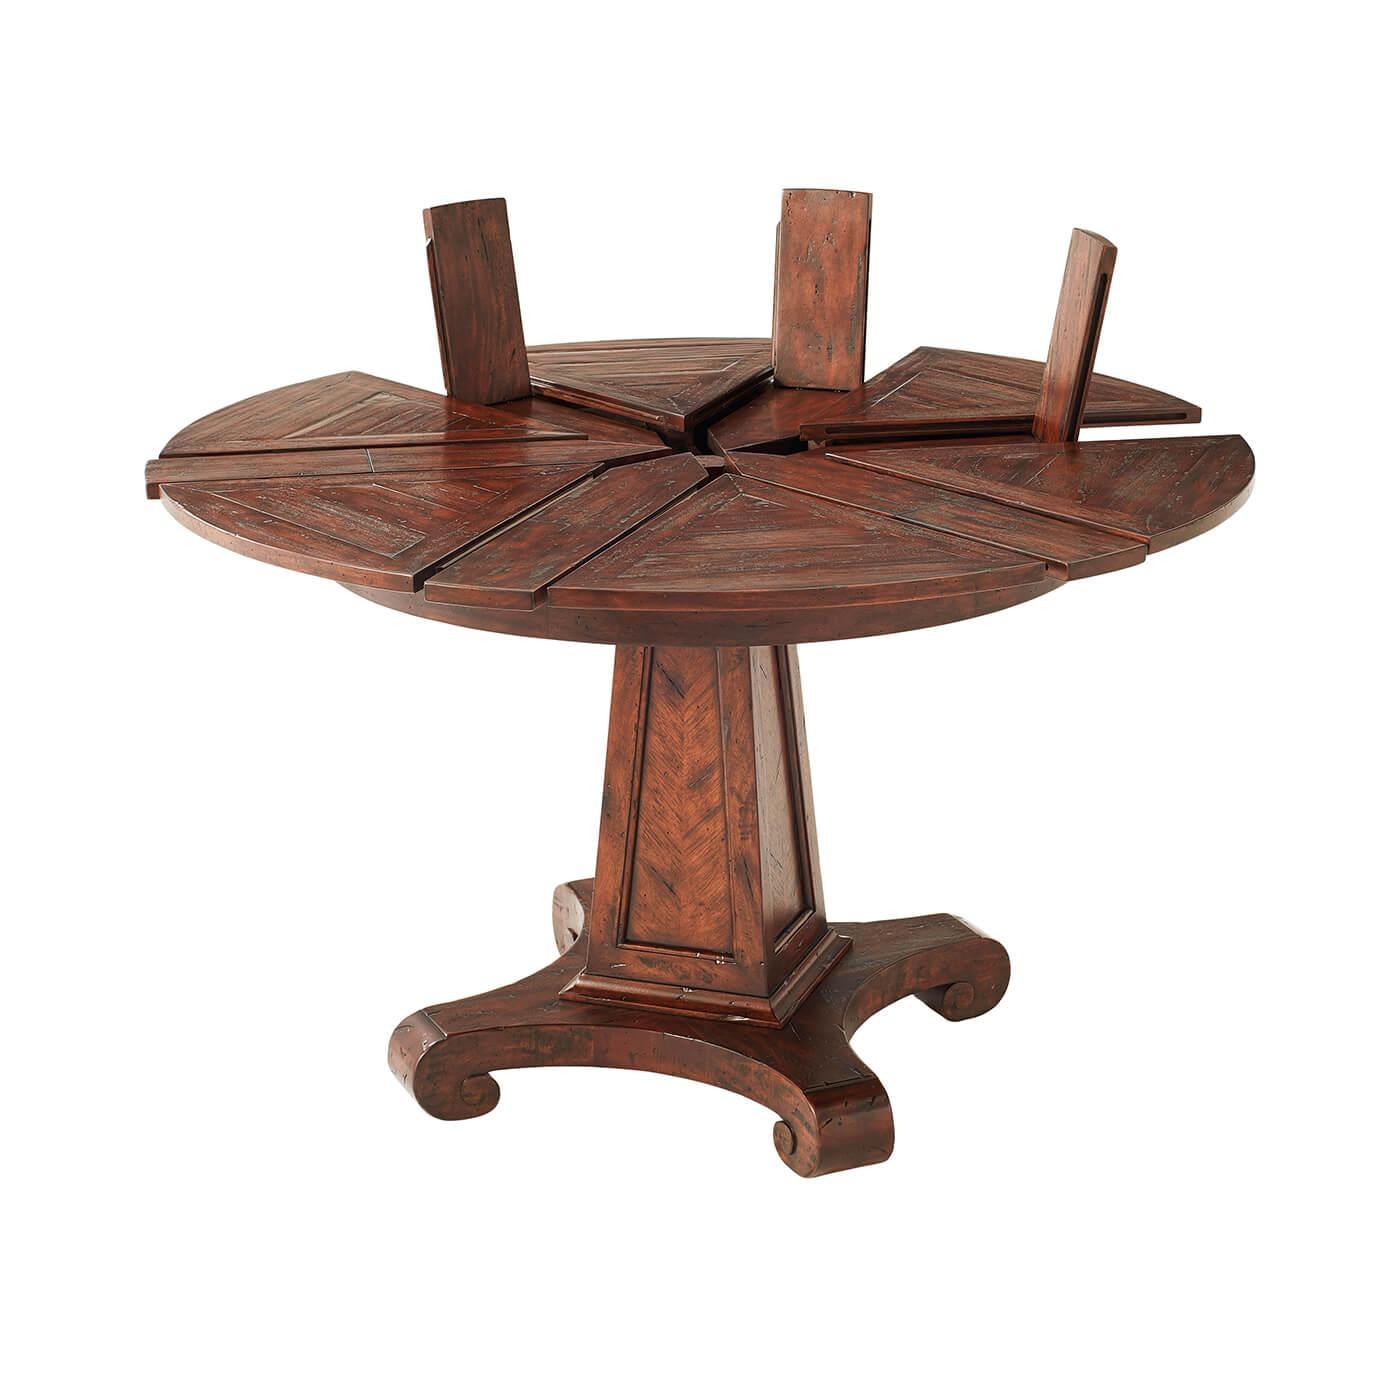 A small antiqued wood circular extending dining table, the top with pull out leaves and fold-out extenders, above a tapered column and a quatrefoil down scroll base. 

Dimensions: 47.25